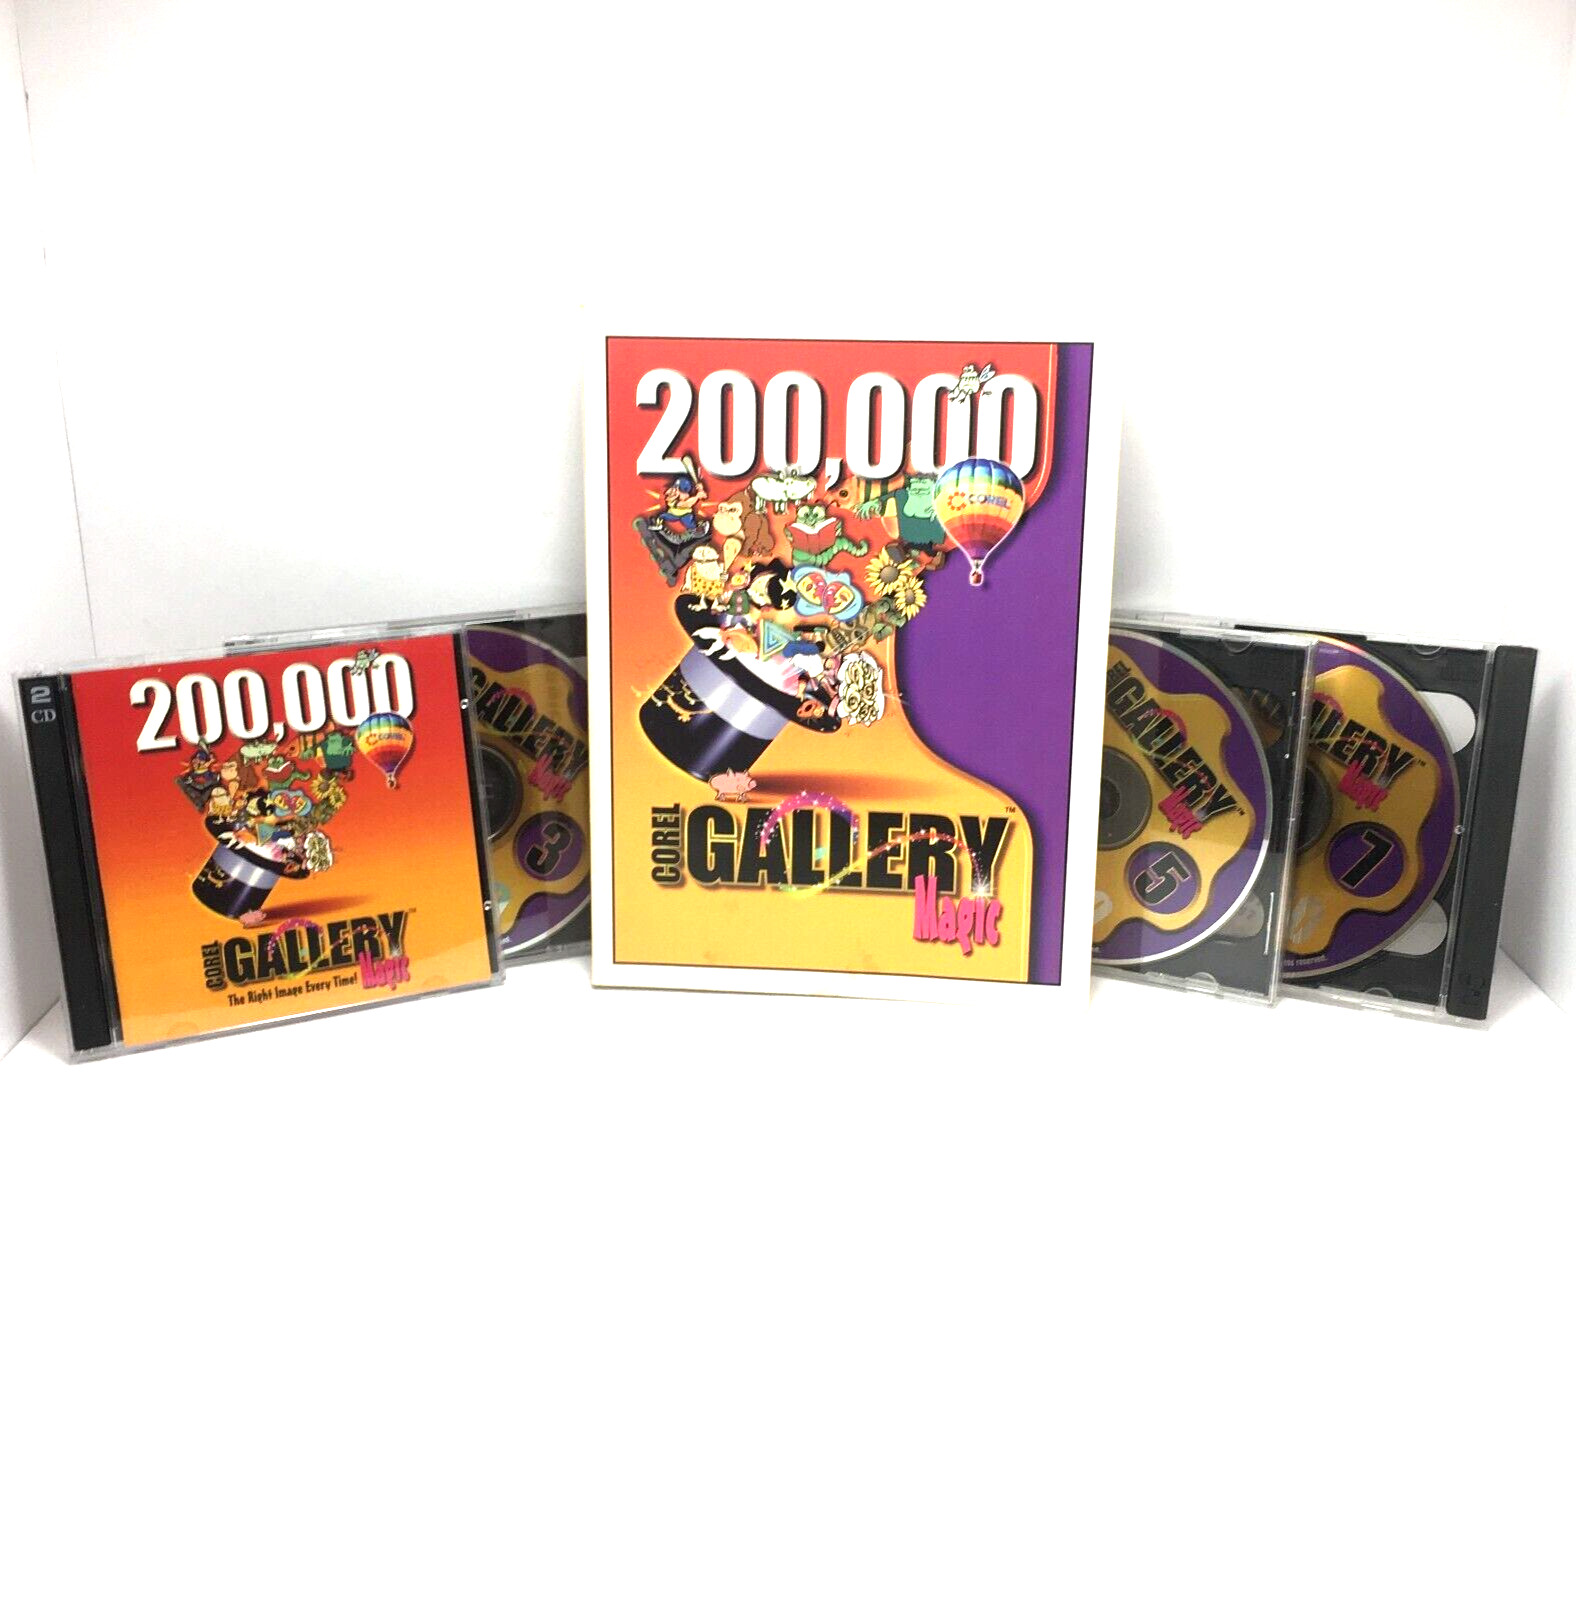 Corel Gallery Magic 200,000 book and 8 CDs clip art pictures fonts vintage 1997